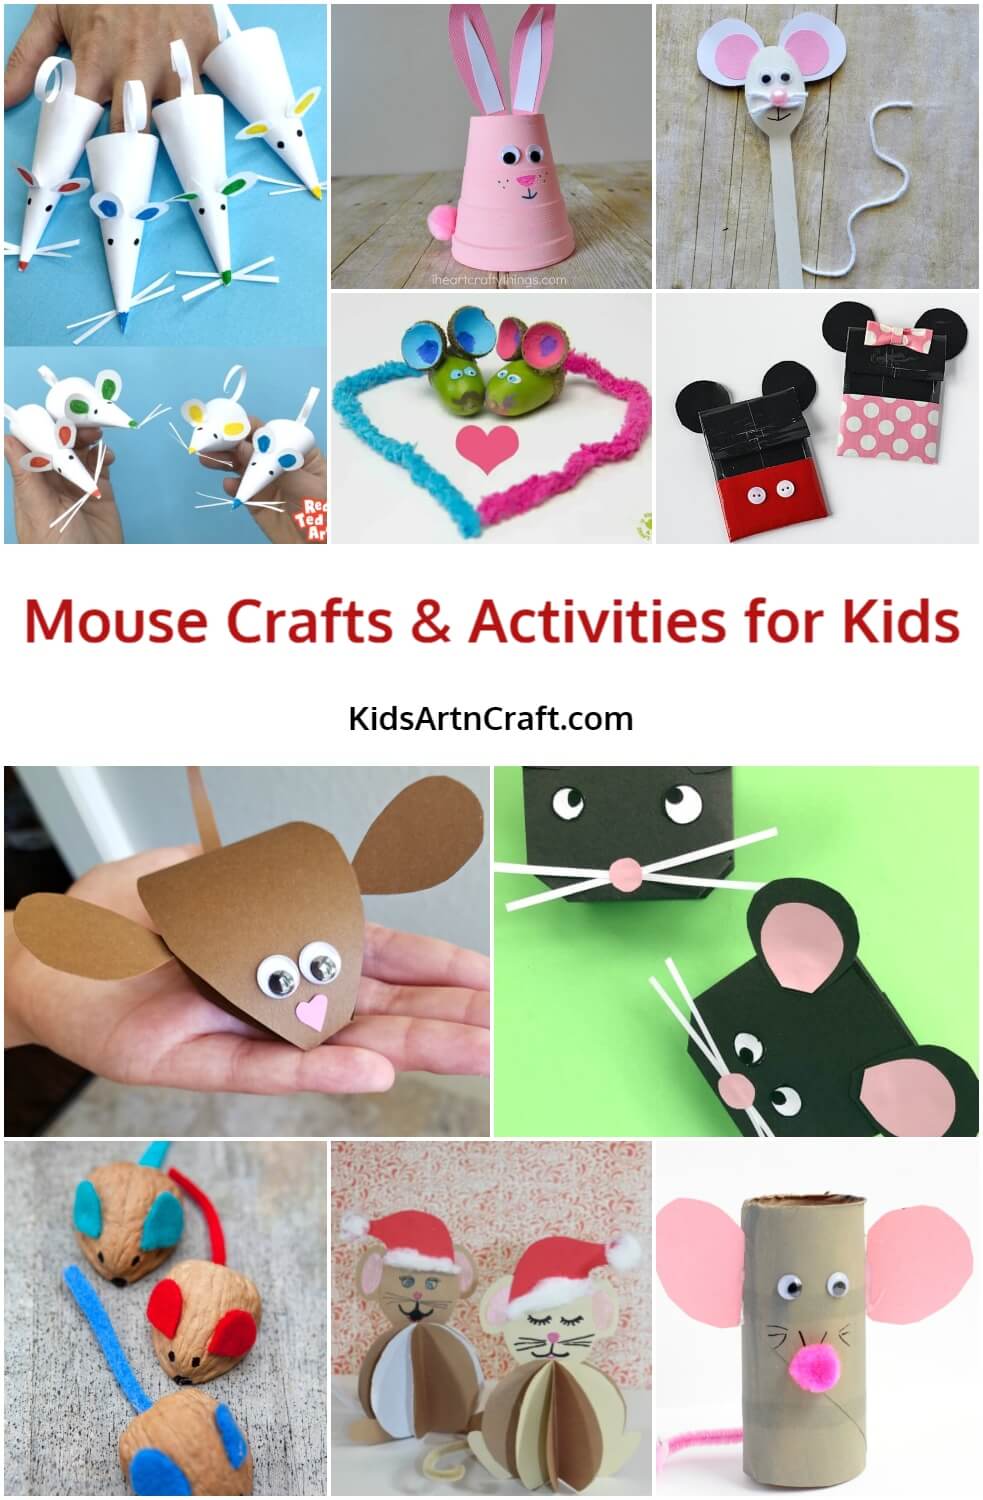 Mouse Crafts & Activities for Kids